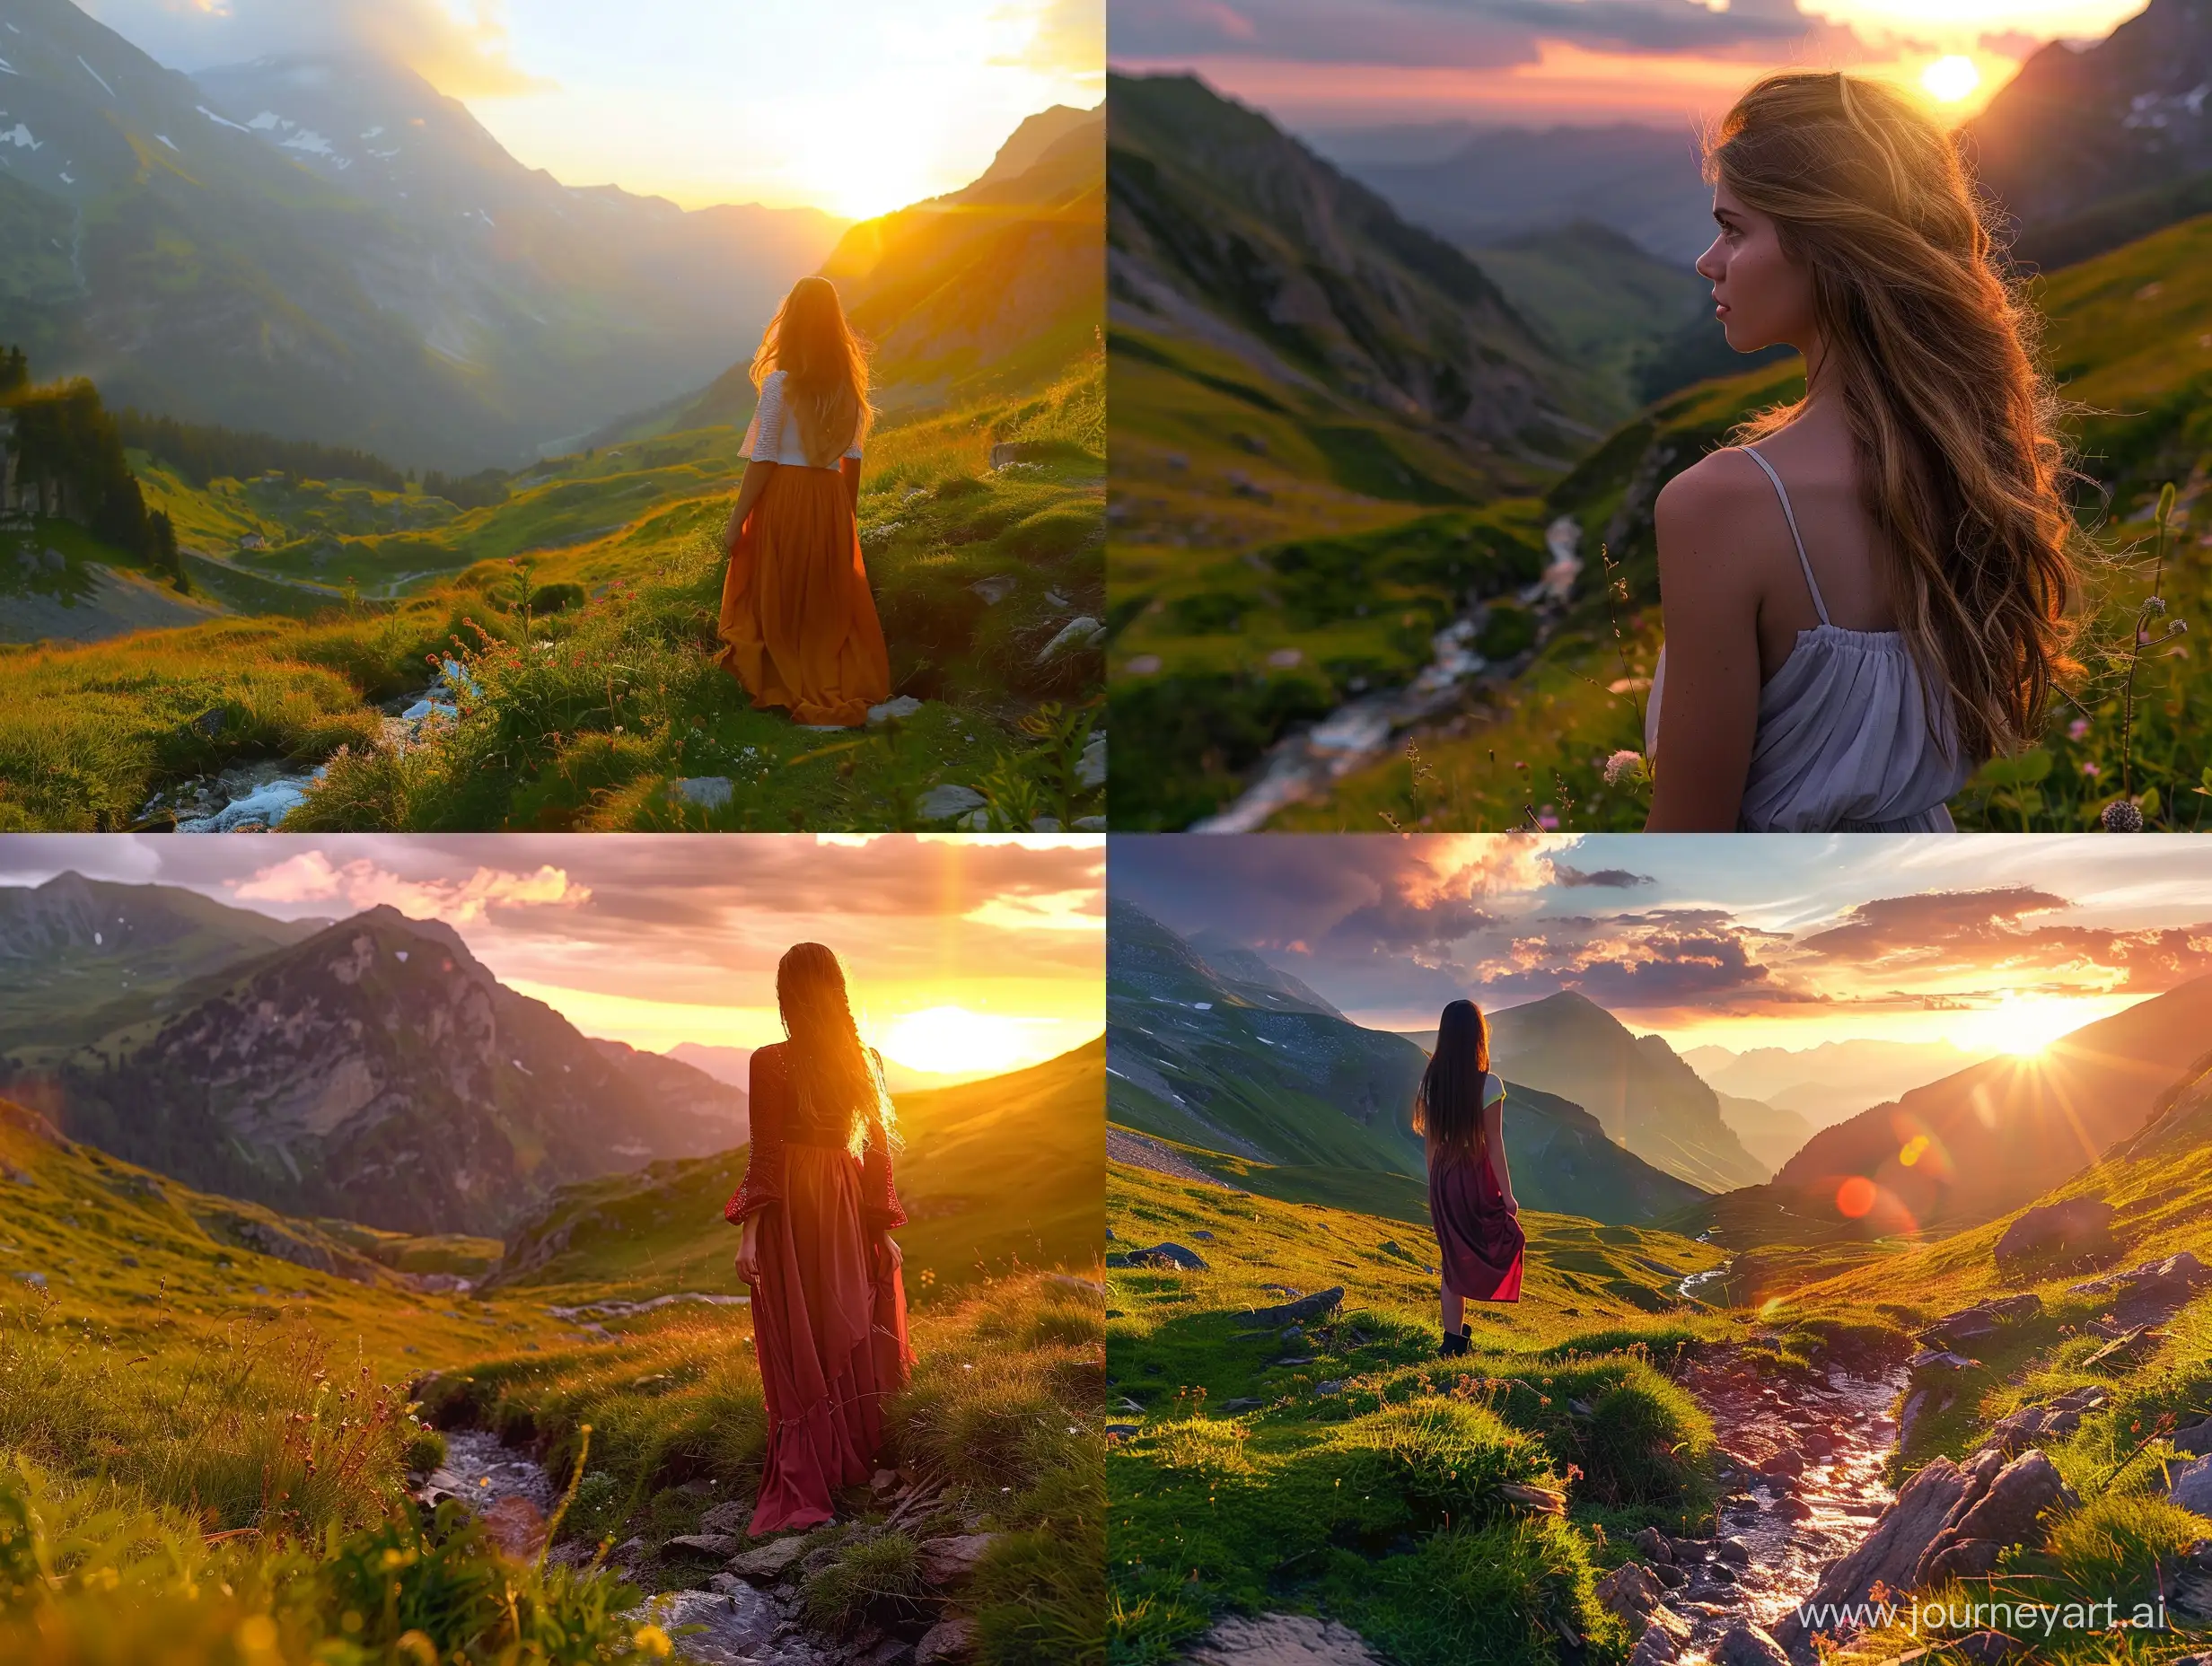 beautiful girl against the background of a Majestic mountain landscape at sunset, bright colors, 4K resolution, calm atmosphere, small stream flowing through the valley